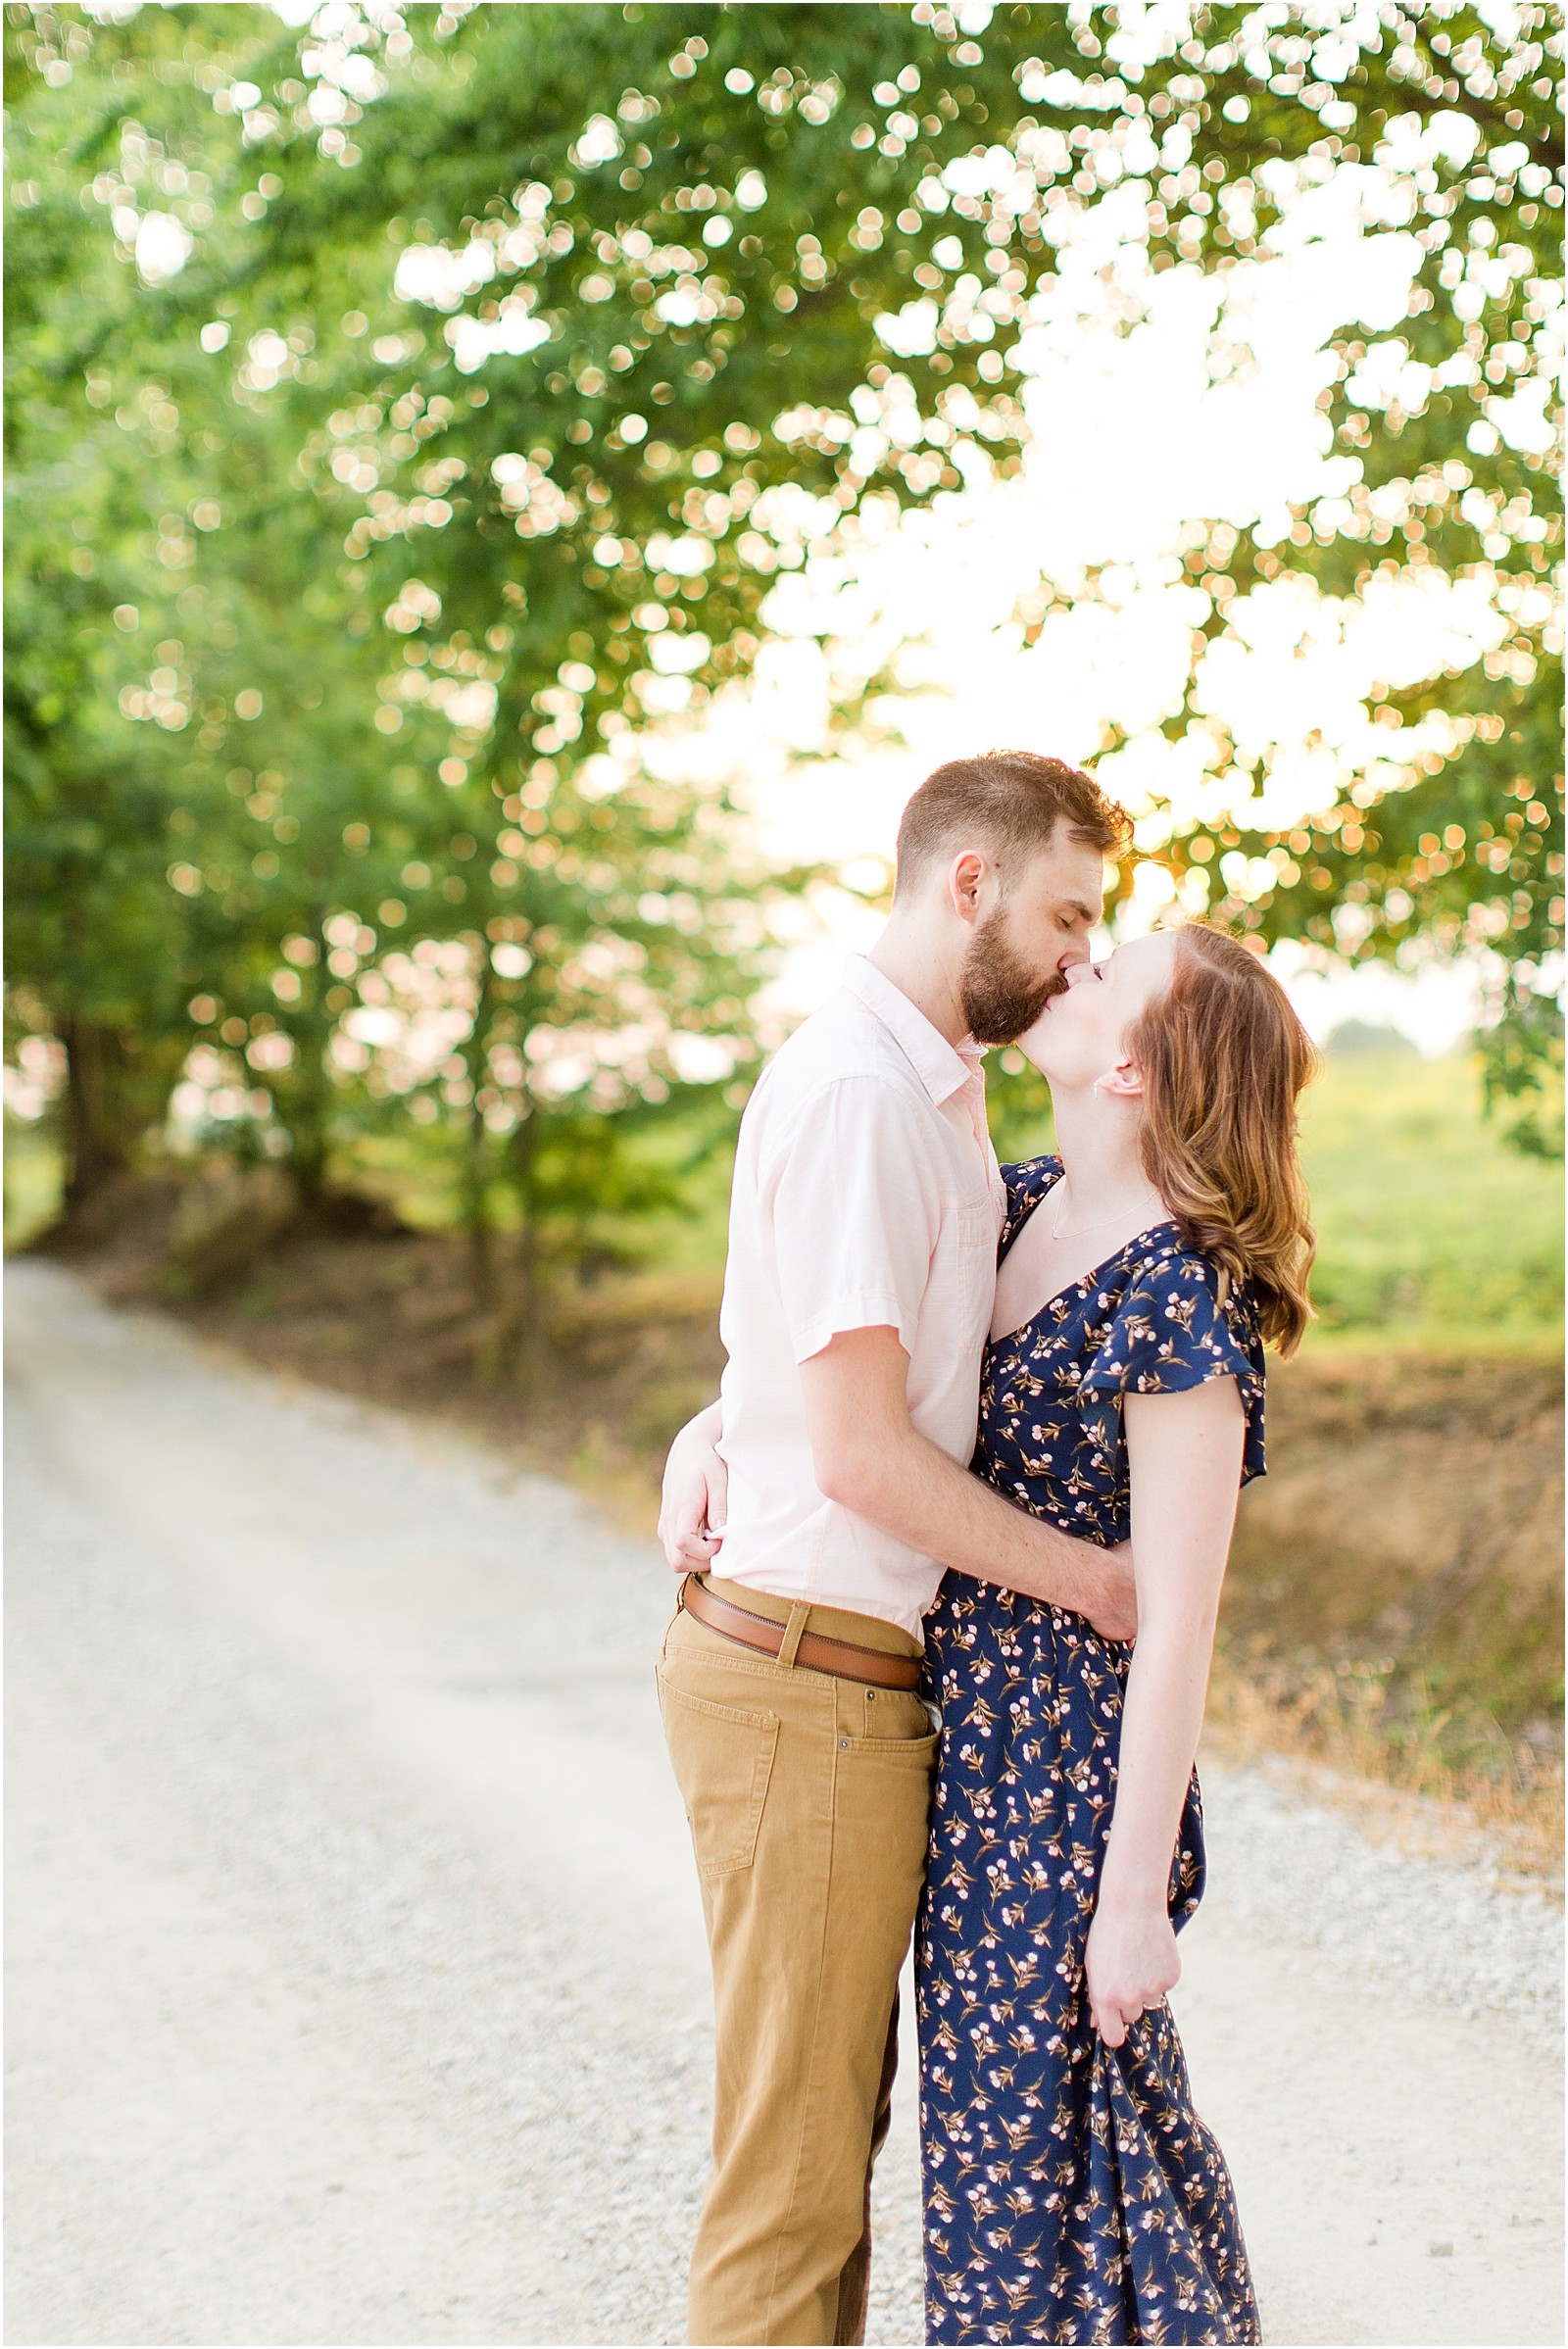 Amy and Logan | The Corner House Bed and Breakfast | Engagement Session023.jpg